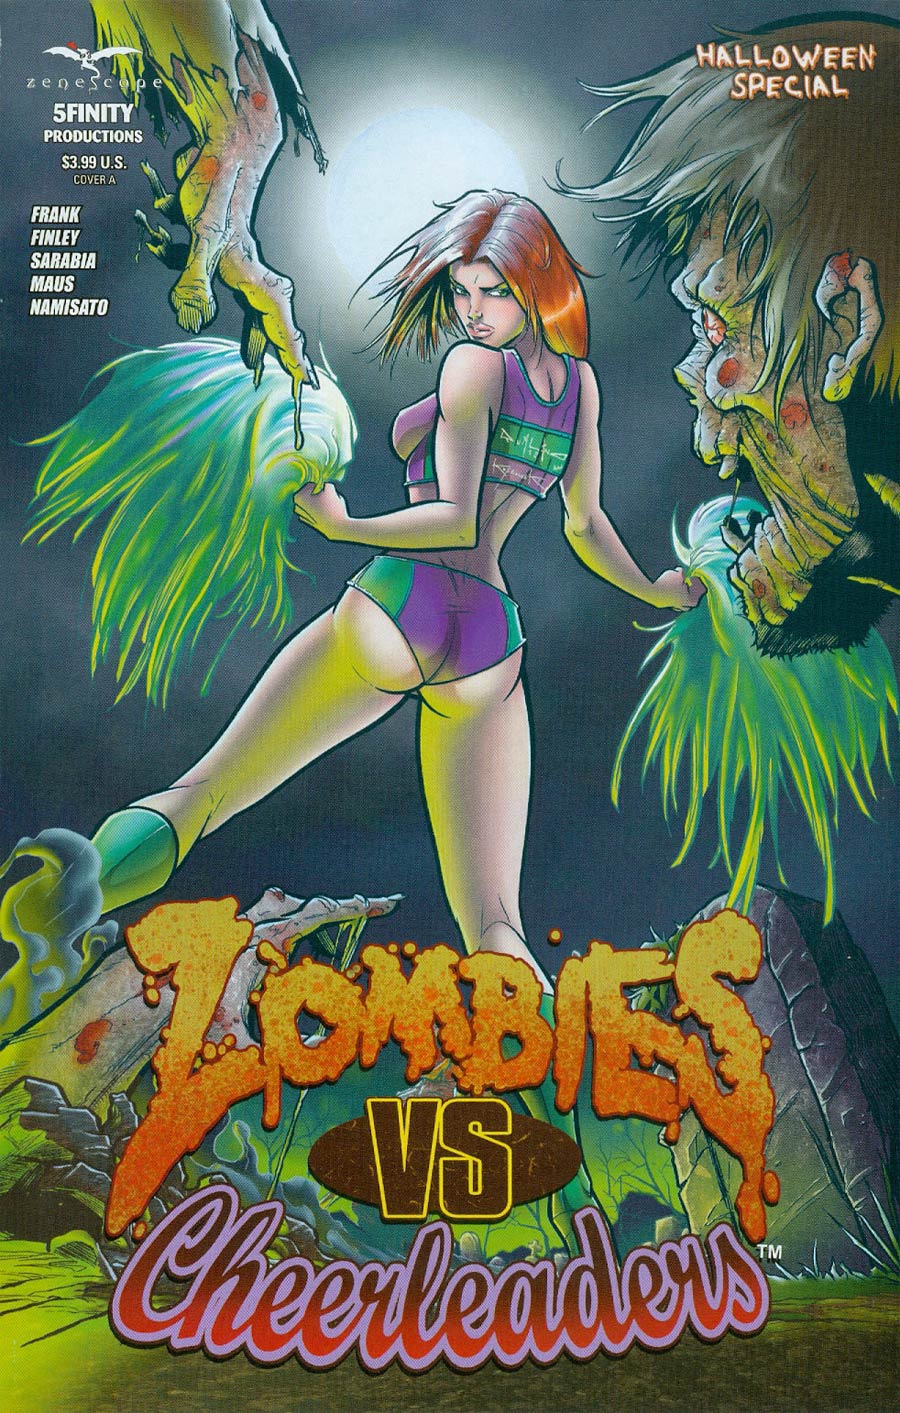 Zombies vs Cheerleaders Halloween Special #1 Cover A Pasquale Qualano